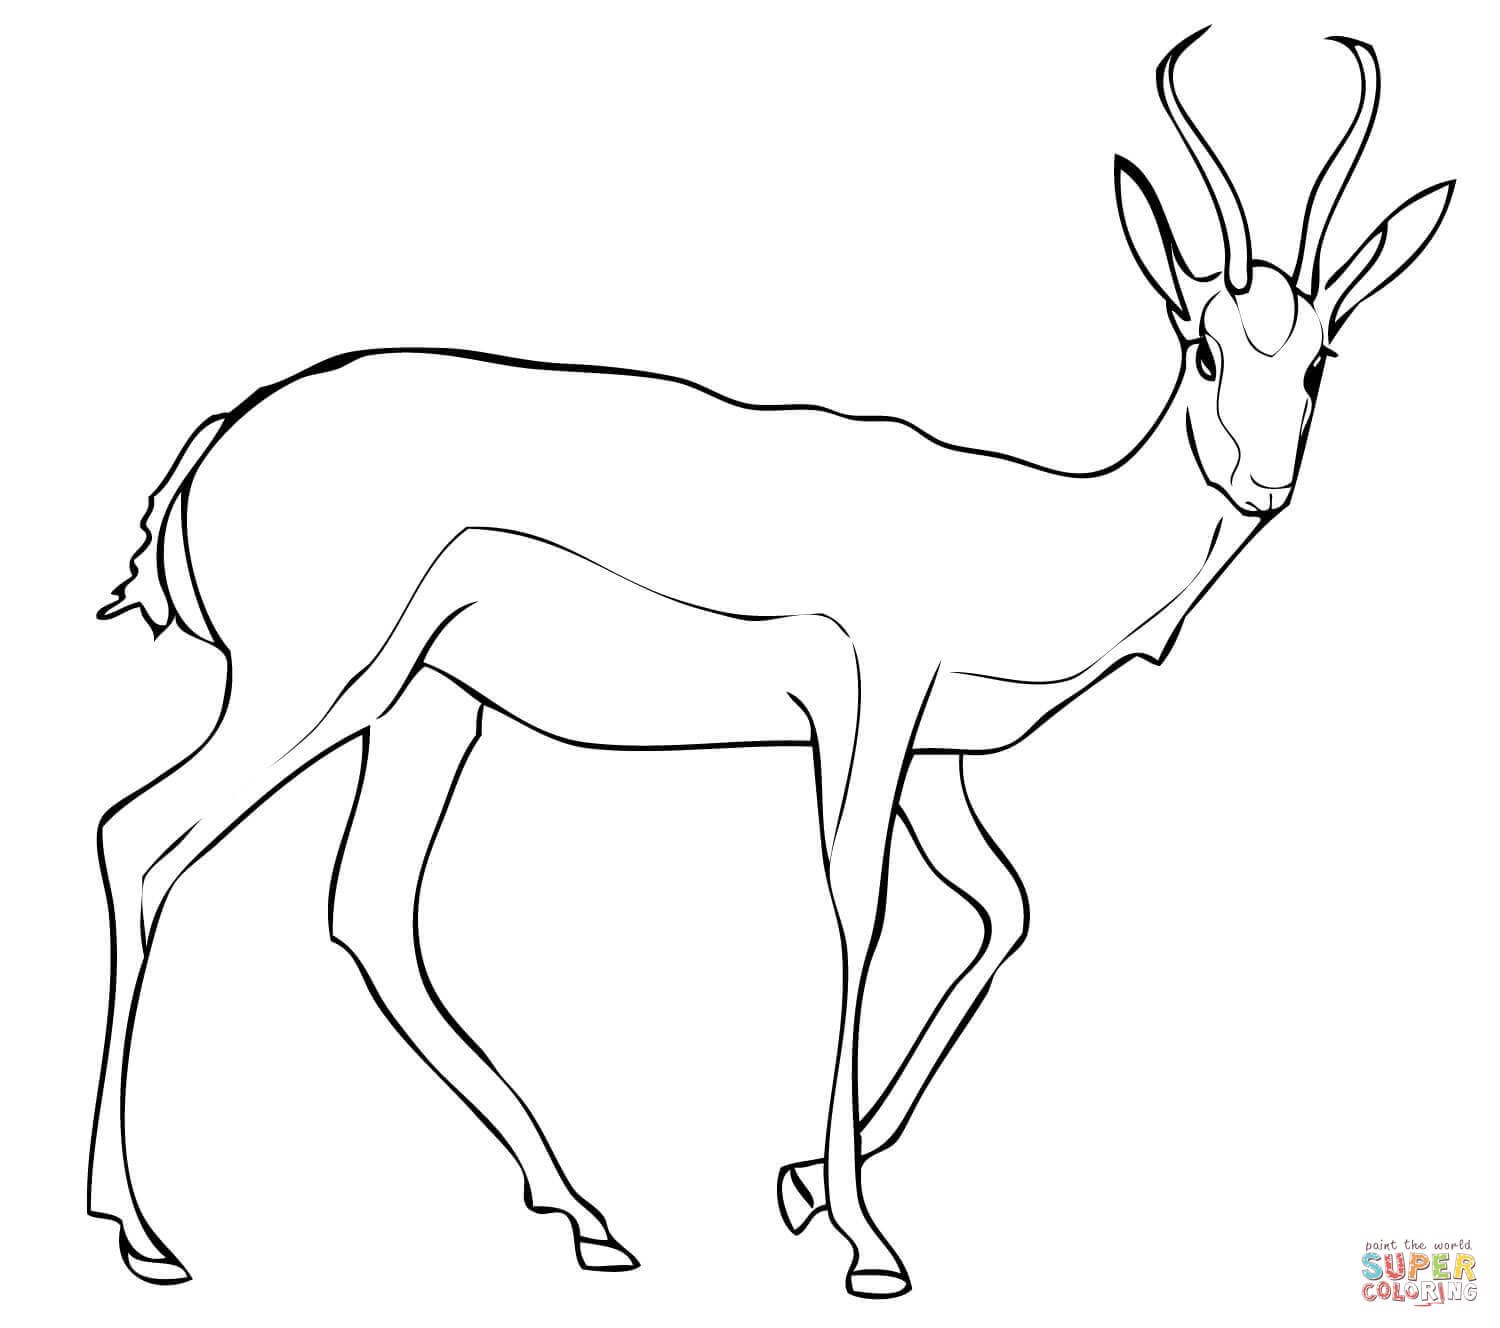 Springbok Antelope coloring page | Free Printable Coloring Pages